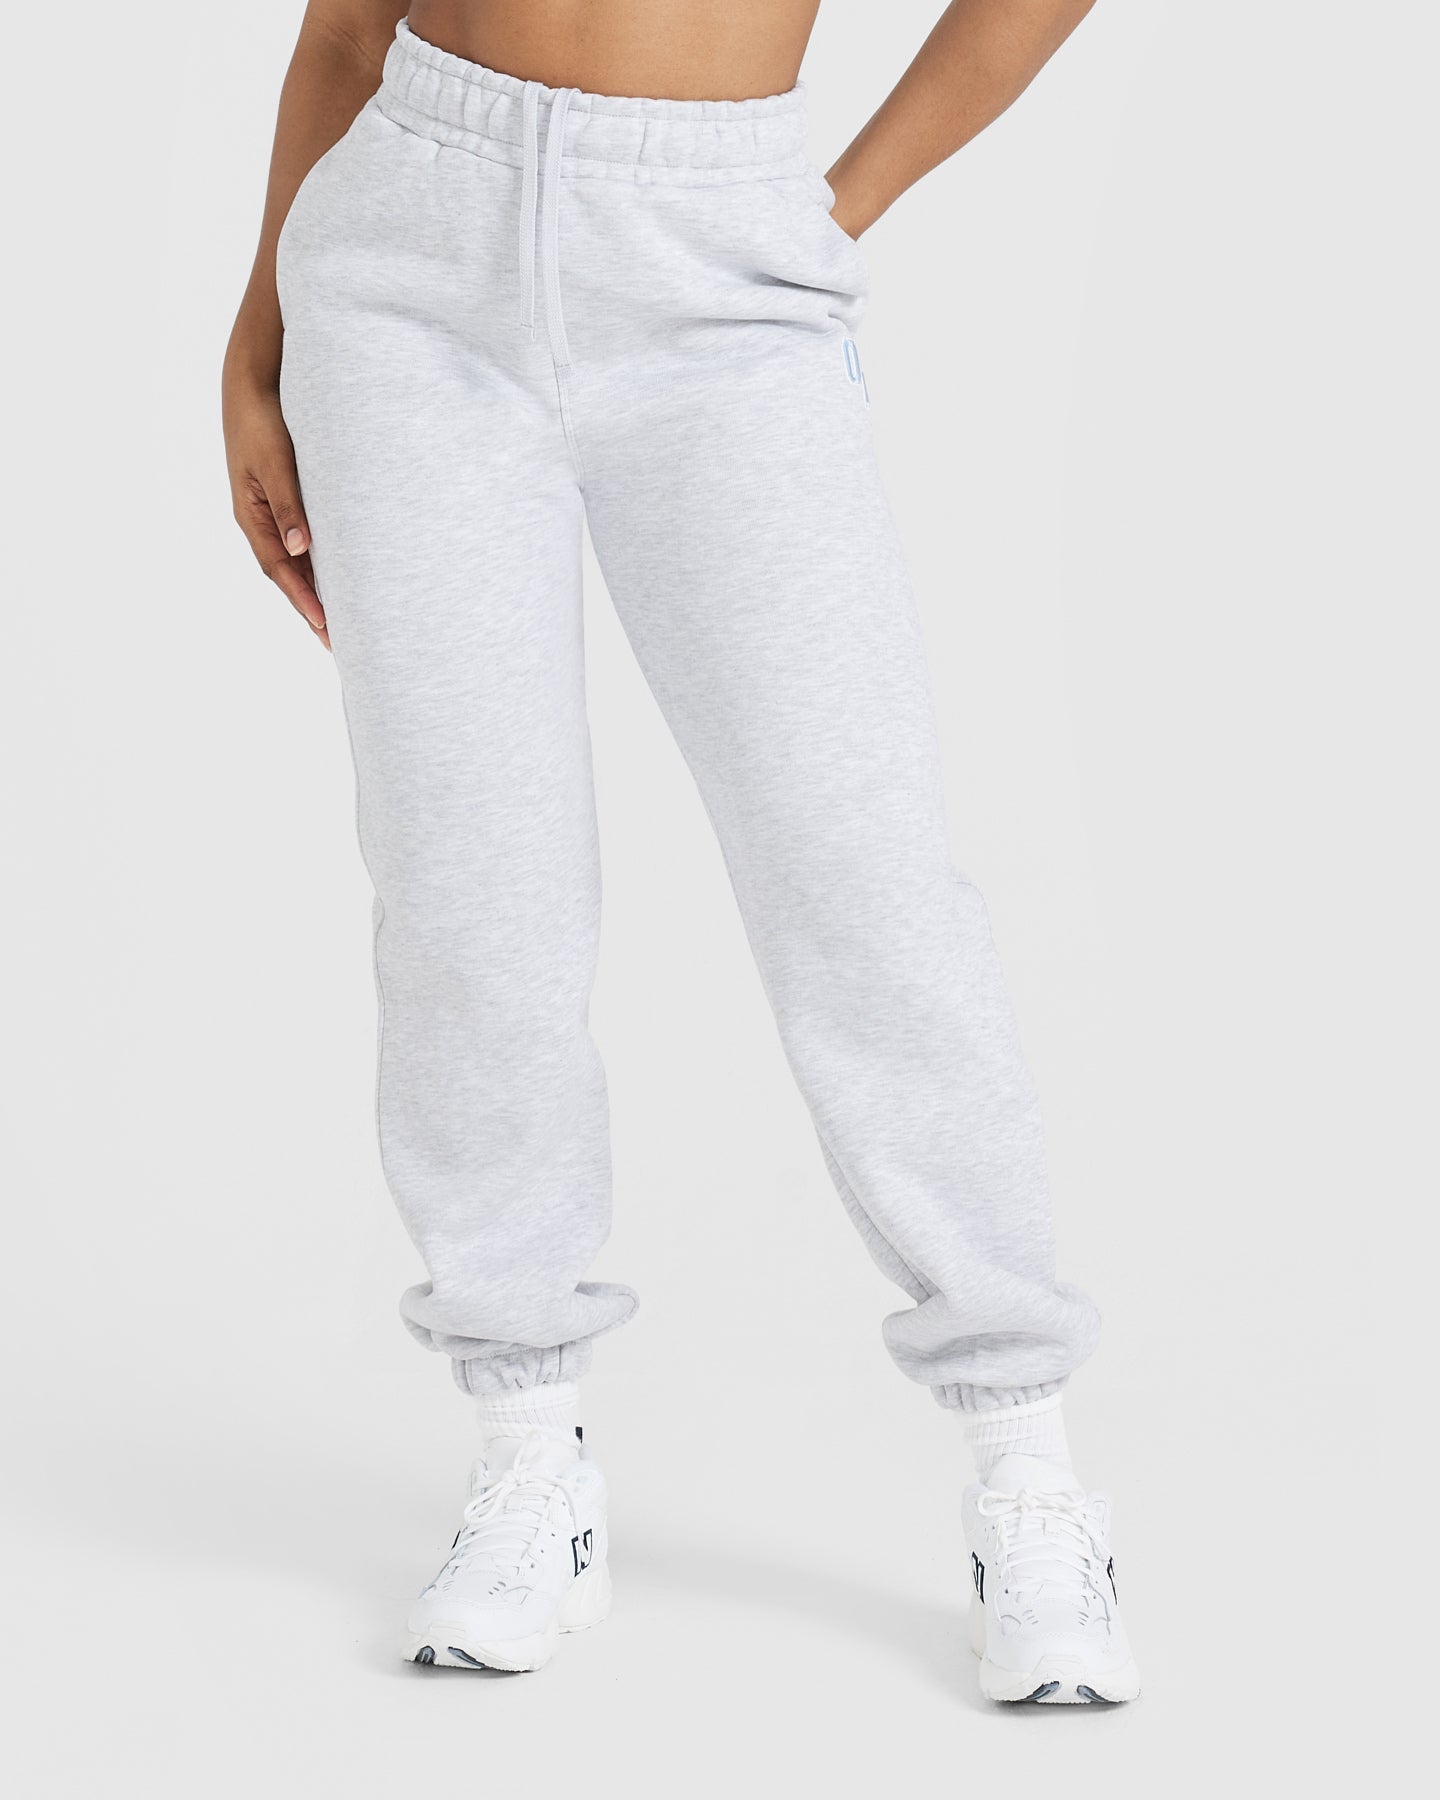 Joggers & Sweatpants for Women  Casual joggers, White strappy